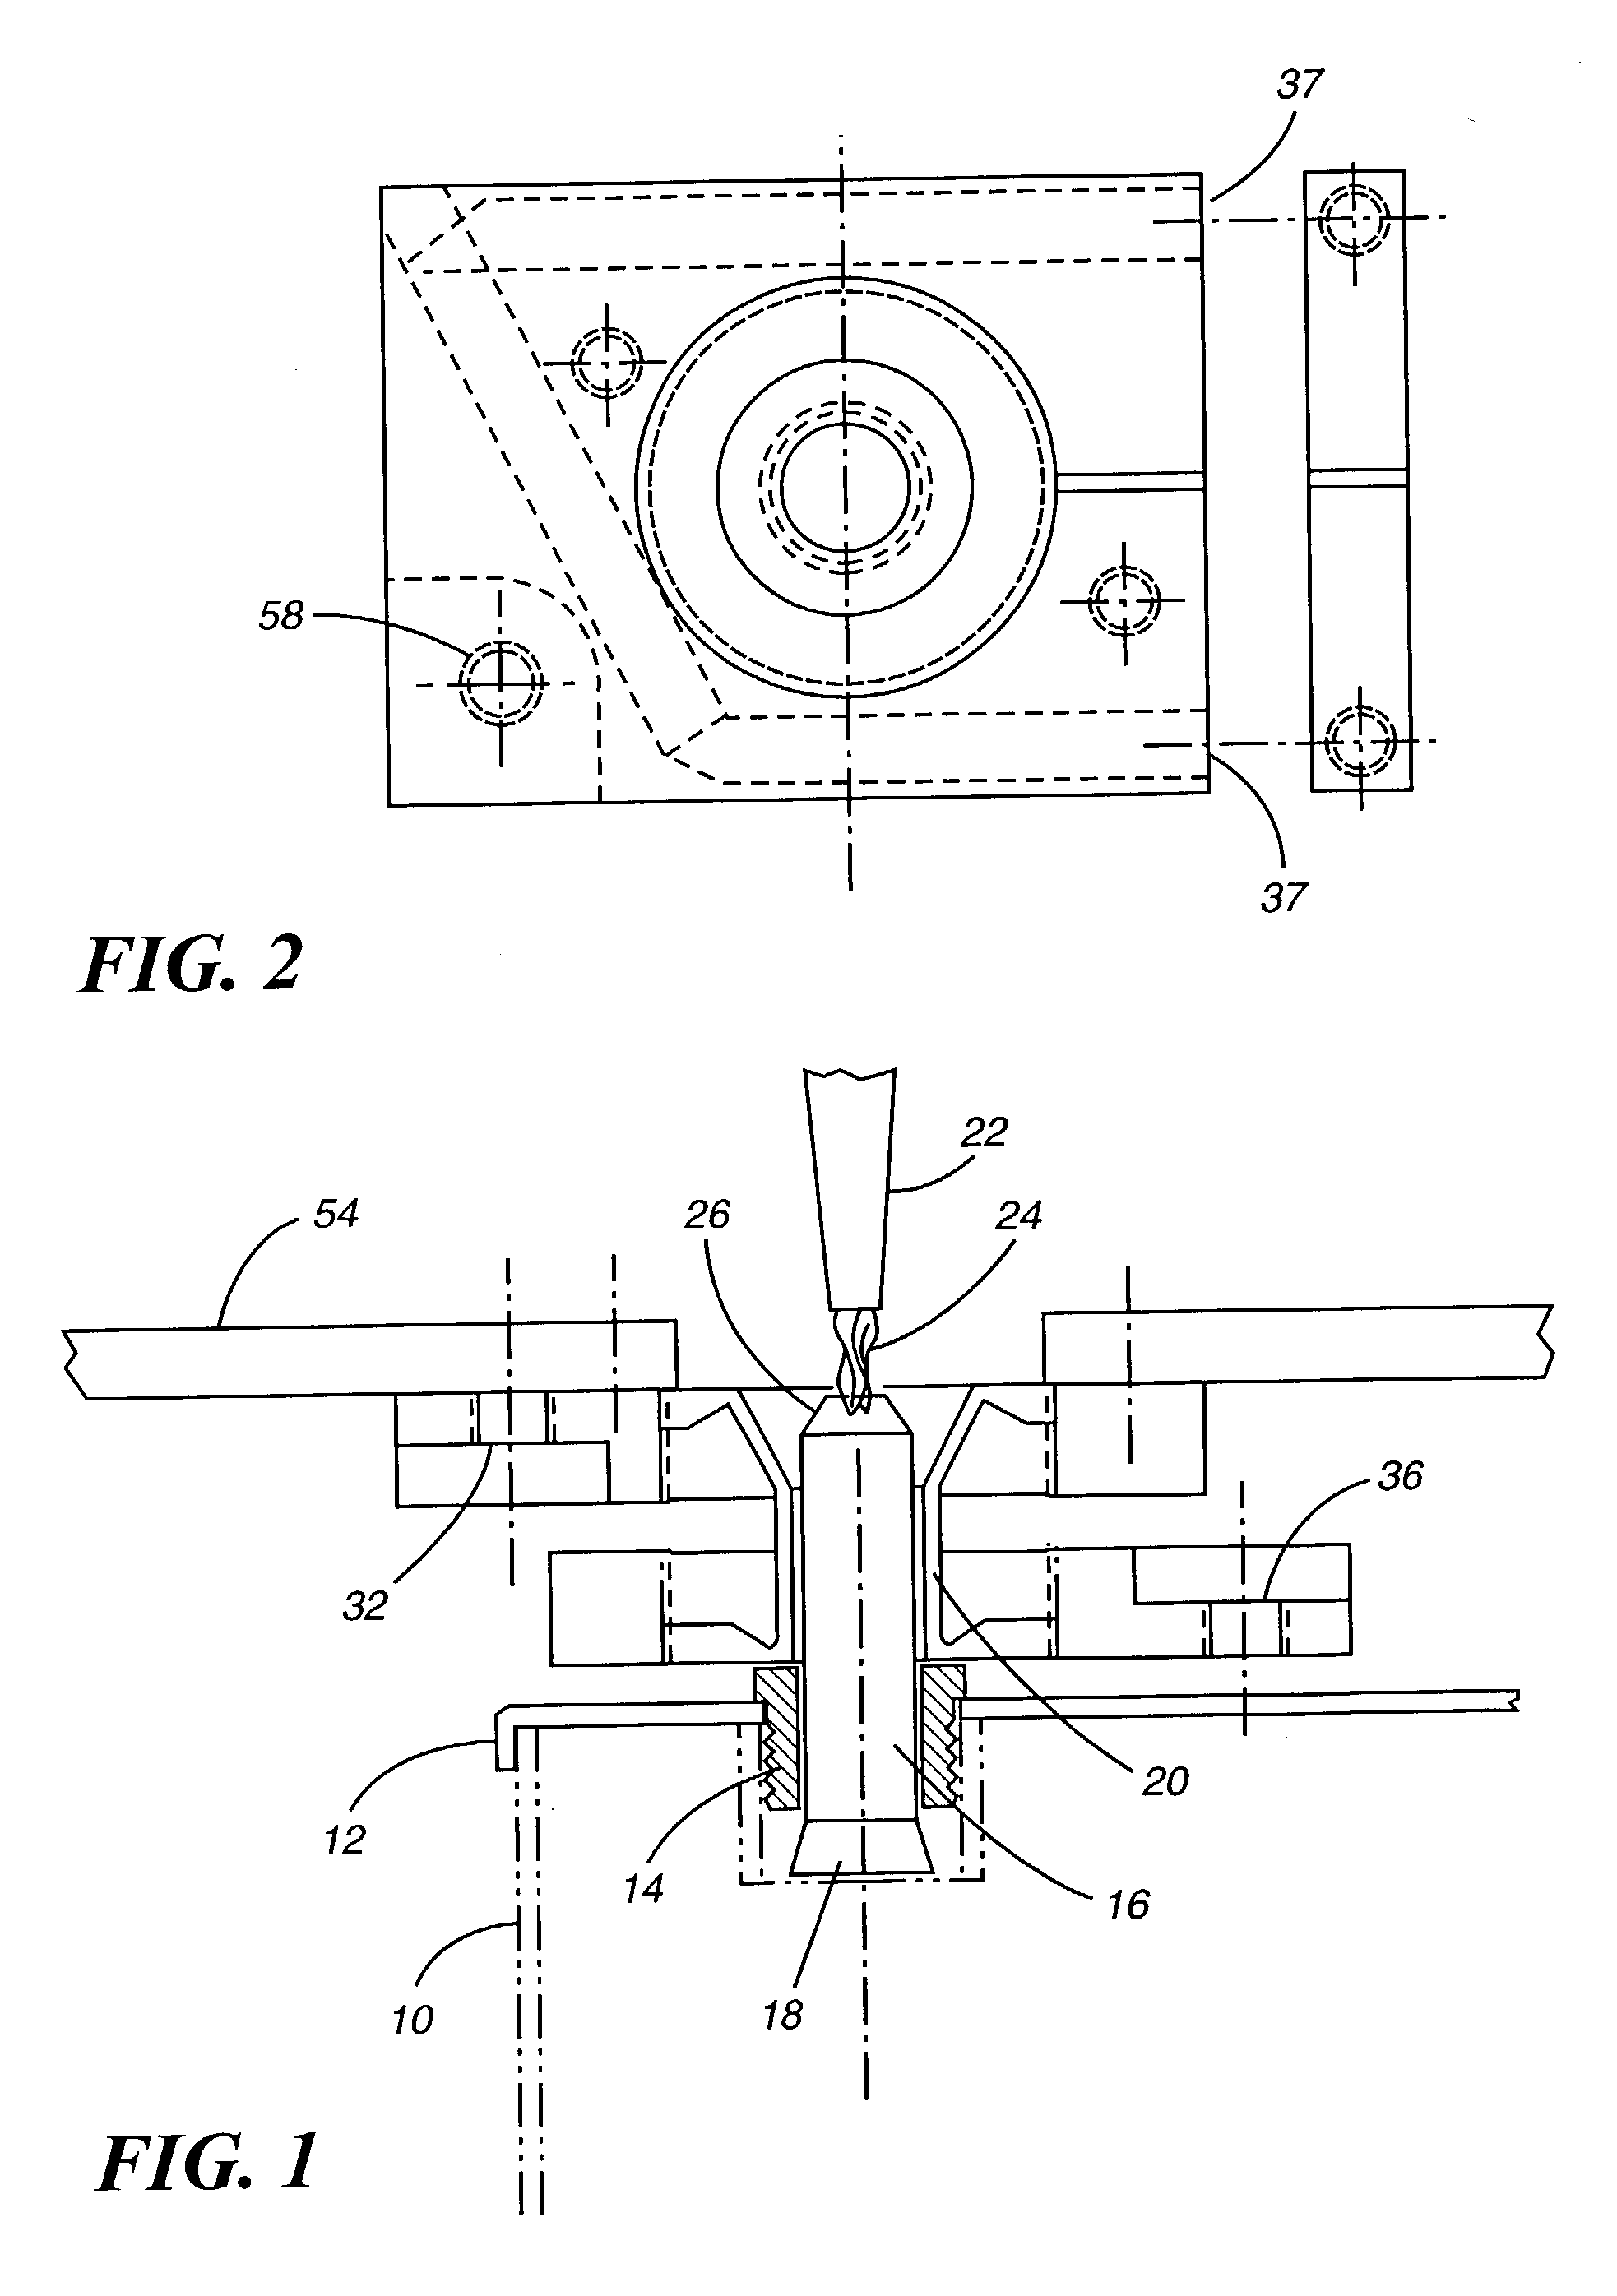 Apparatus and method for forming battery terminal posts